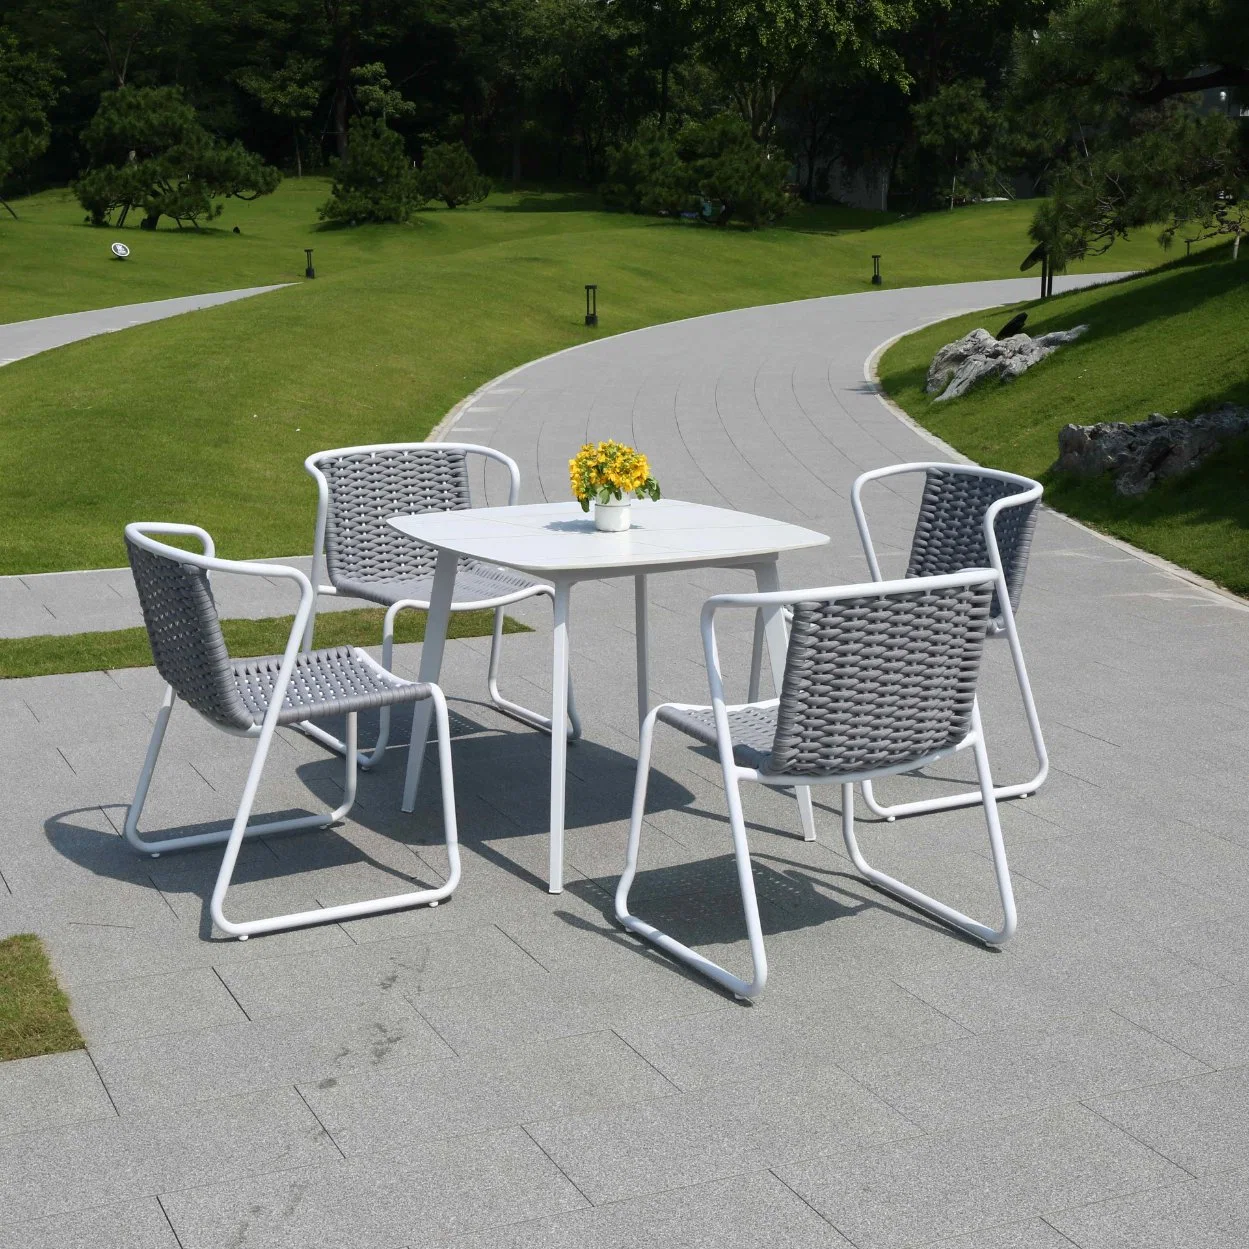 4 Chairs and 1 Table Aluminum Frame Outdoor Garden Patio Swimming Pool Side Table and Chair Set